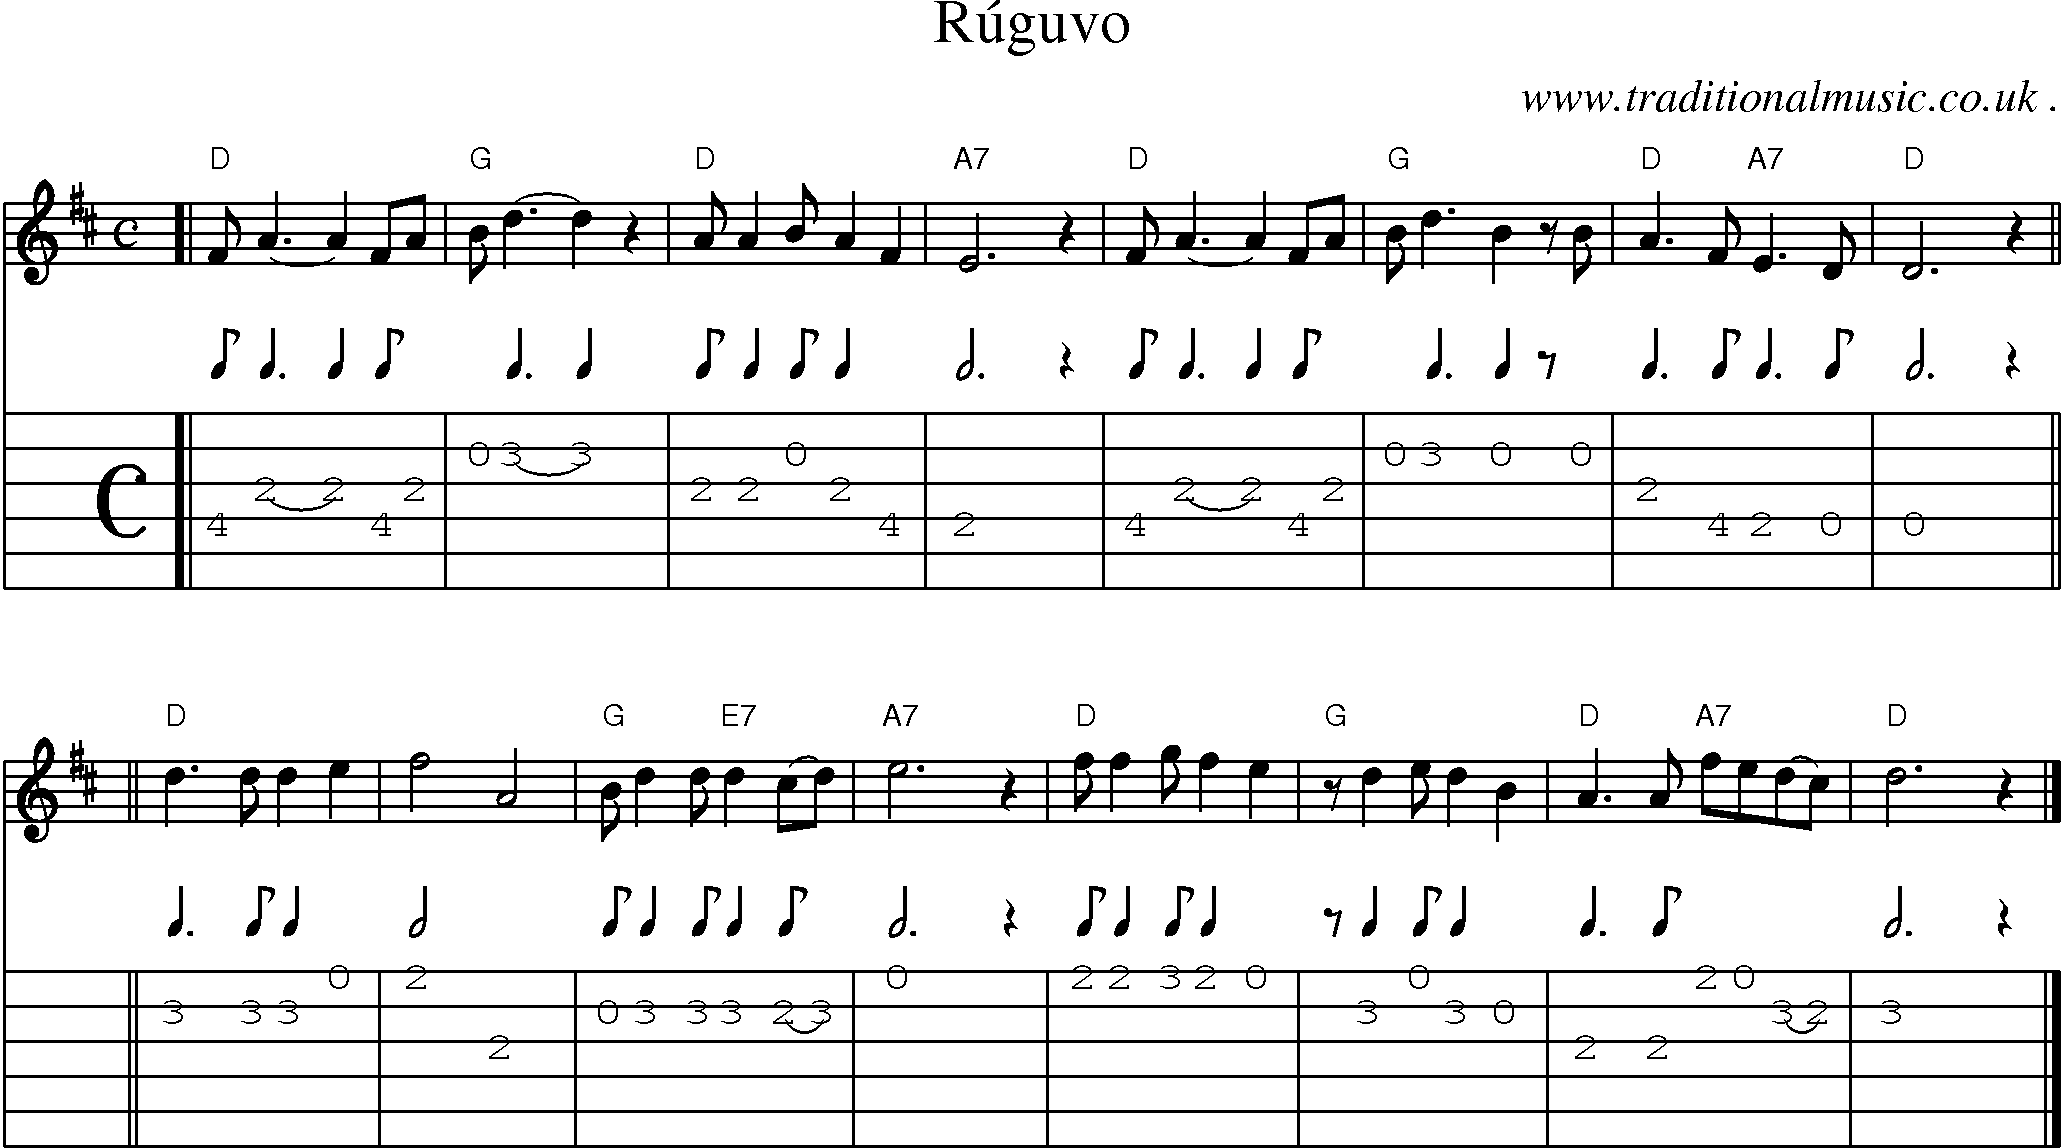 Sheet-music  score, Chords and Guitar Tabs for Ruguvo